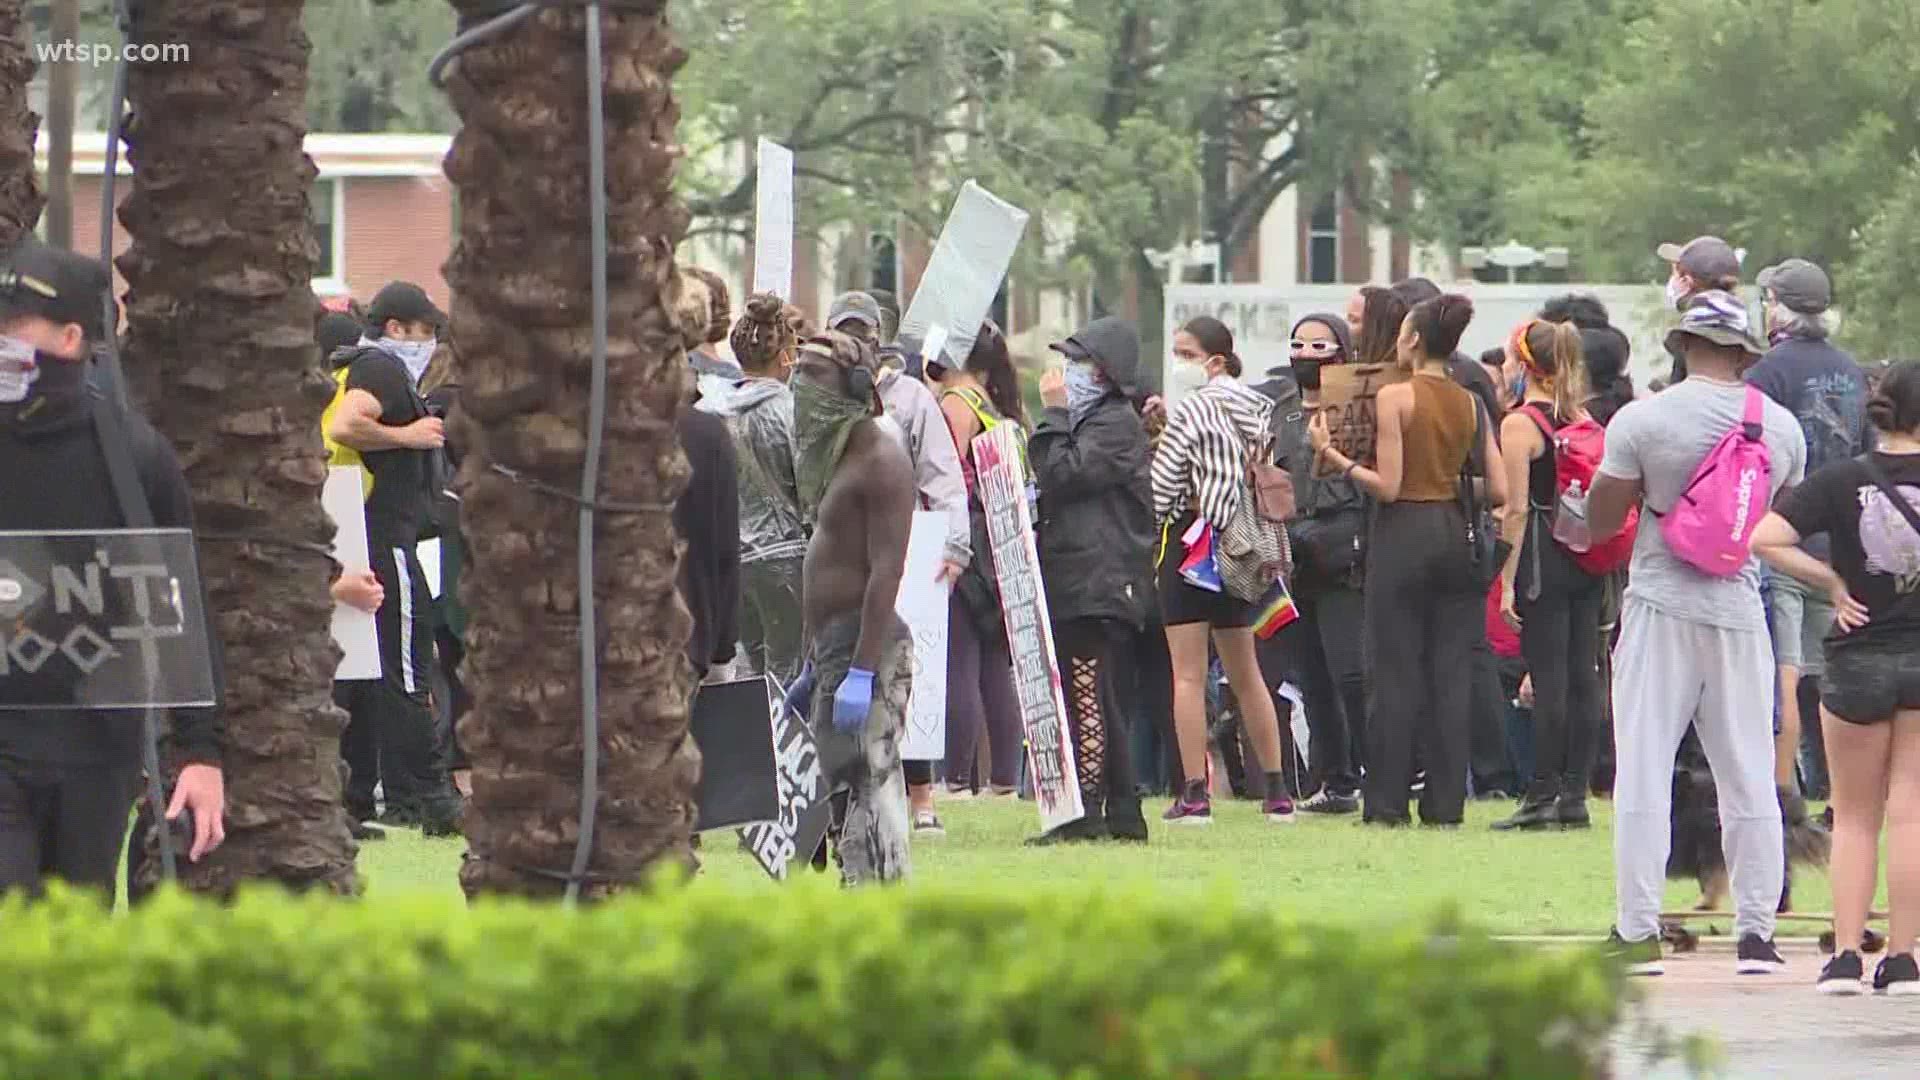 For the second weekend, people are walking through downtown Tampa against police brutality and racial injustice following the death of George Floyd.